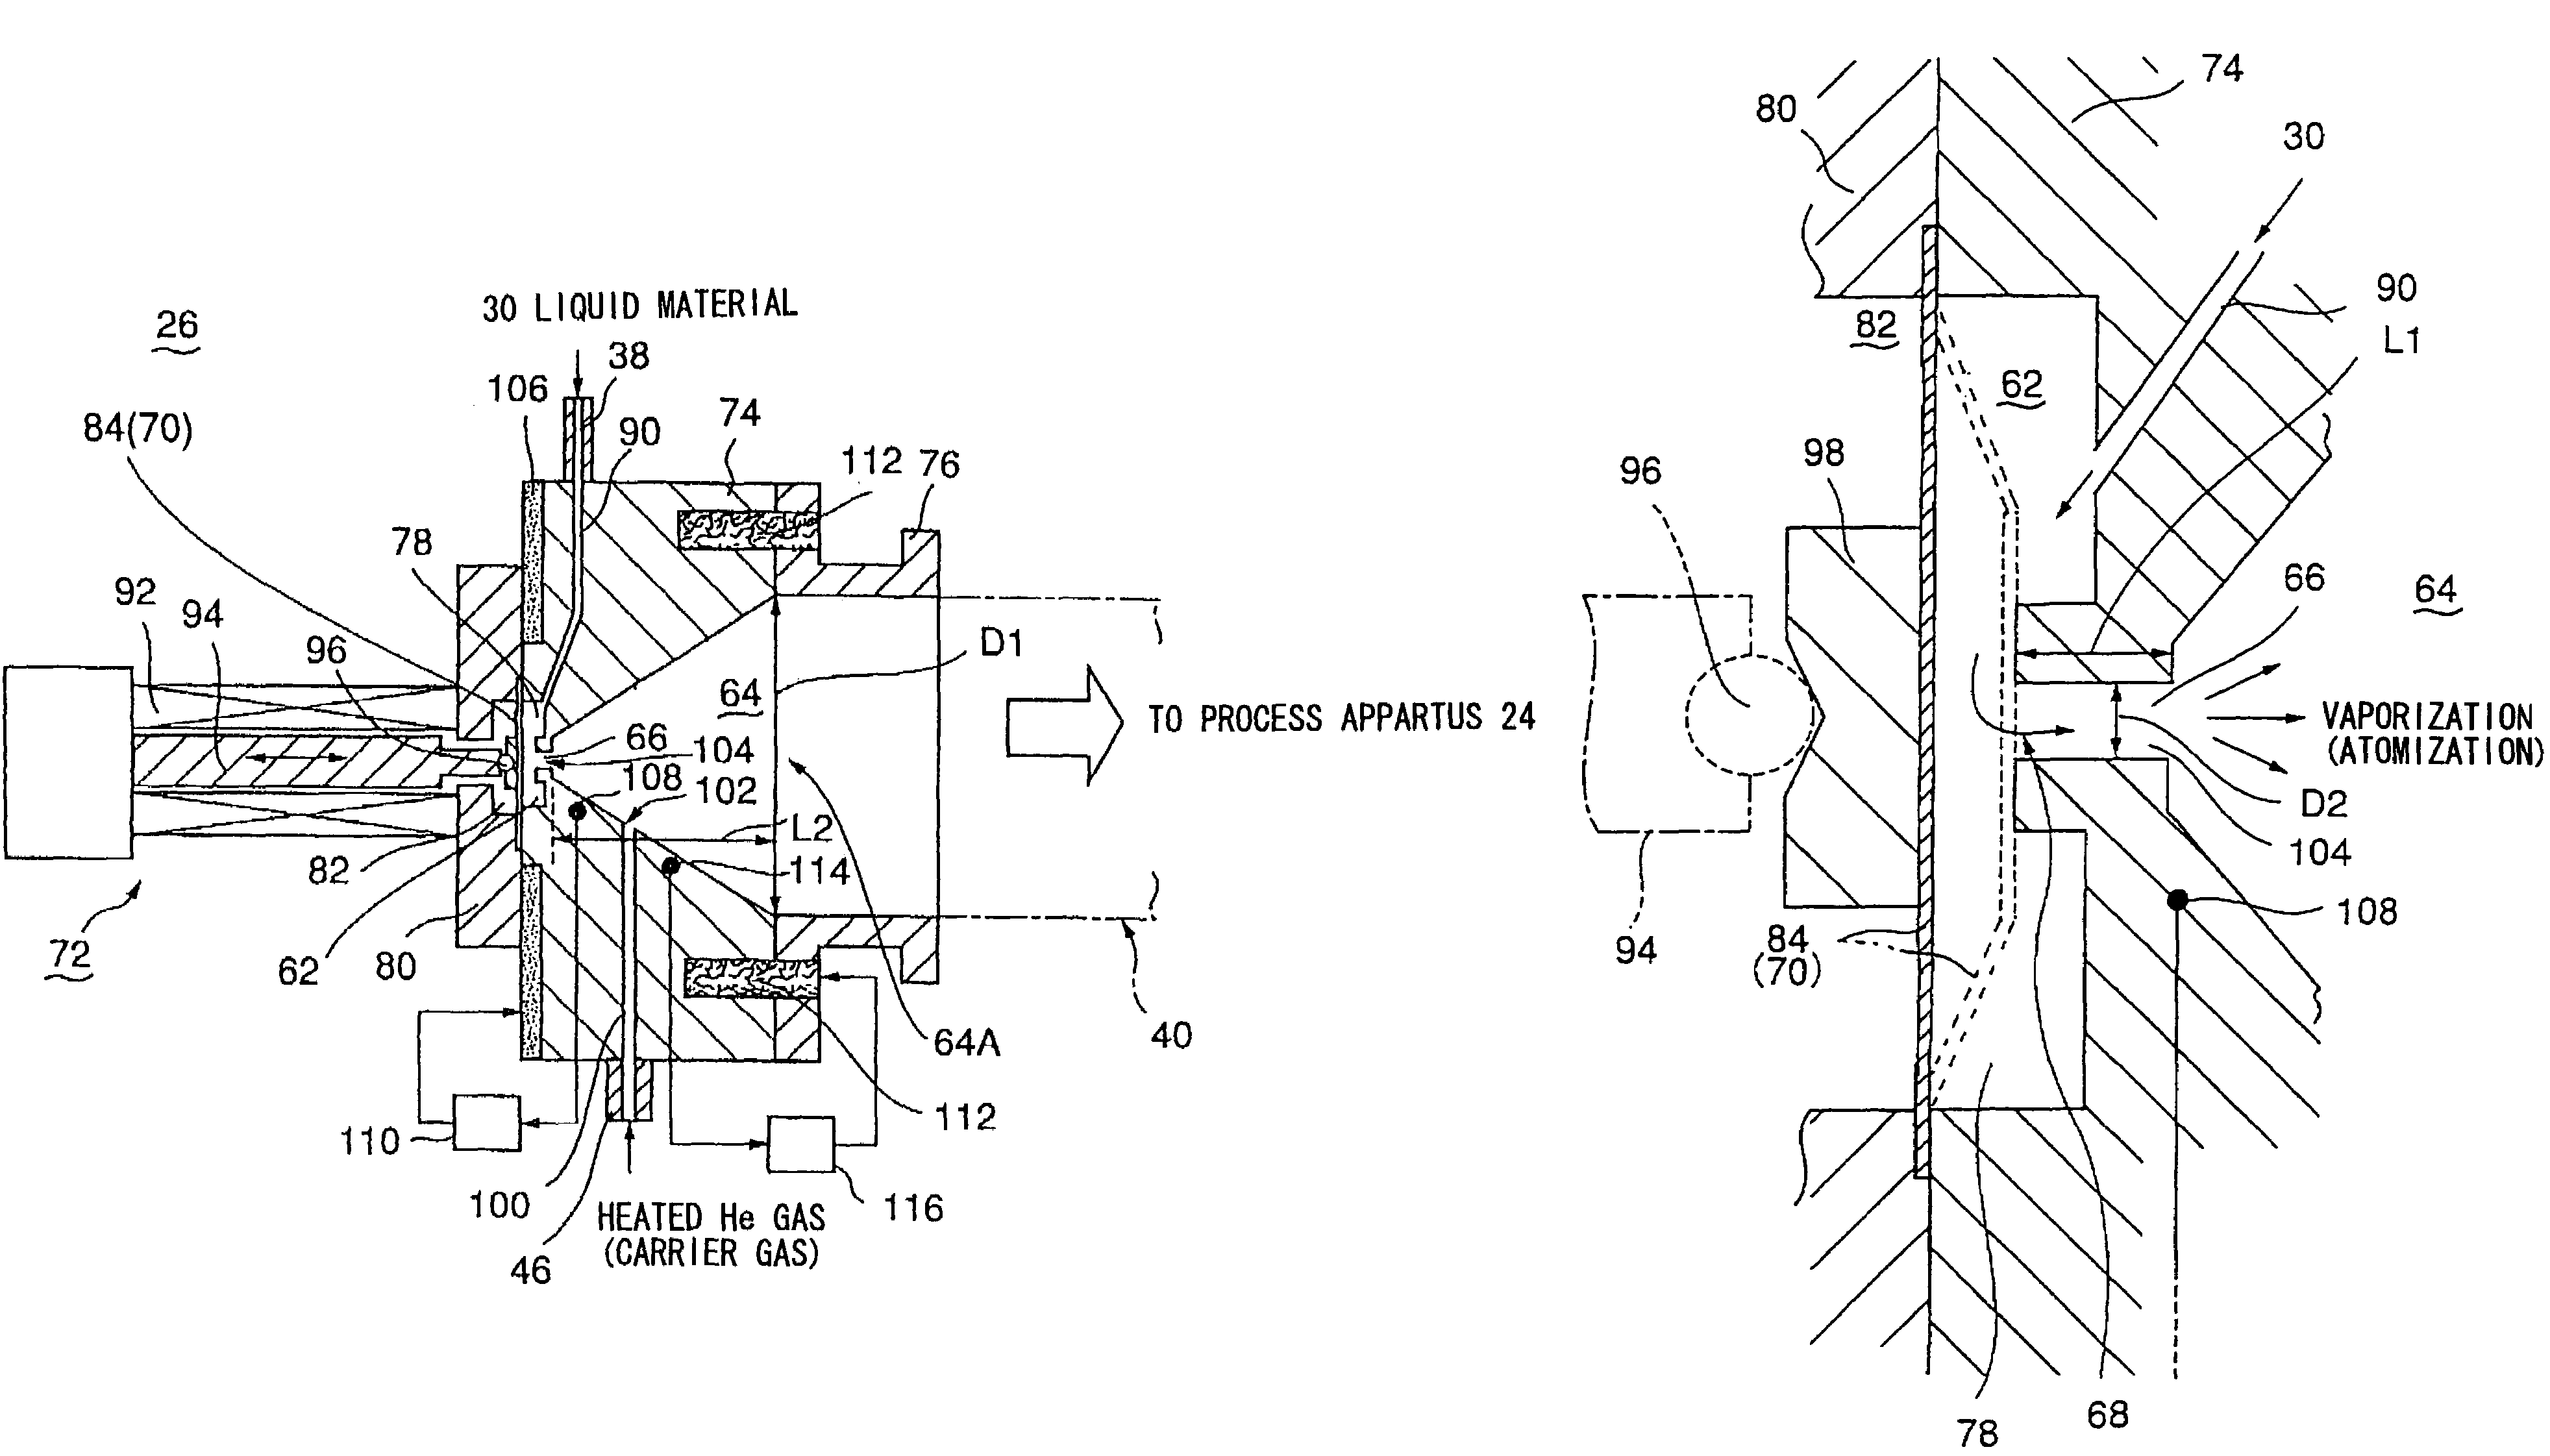 Semiconductor manufacturing system having a vaporizer which efficiently vaporizes a liquid material